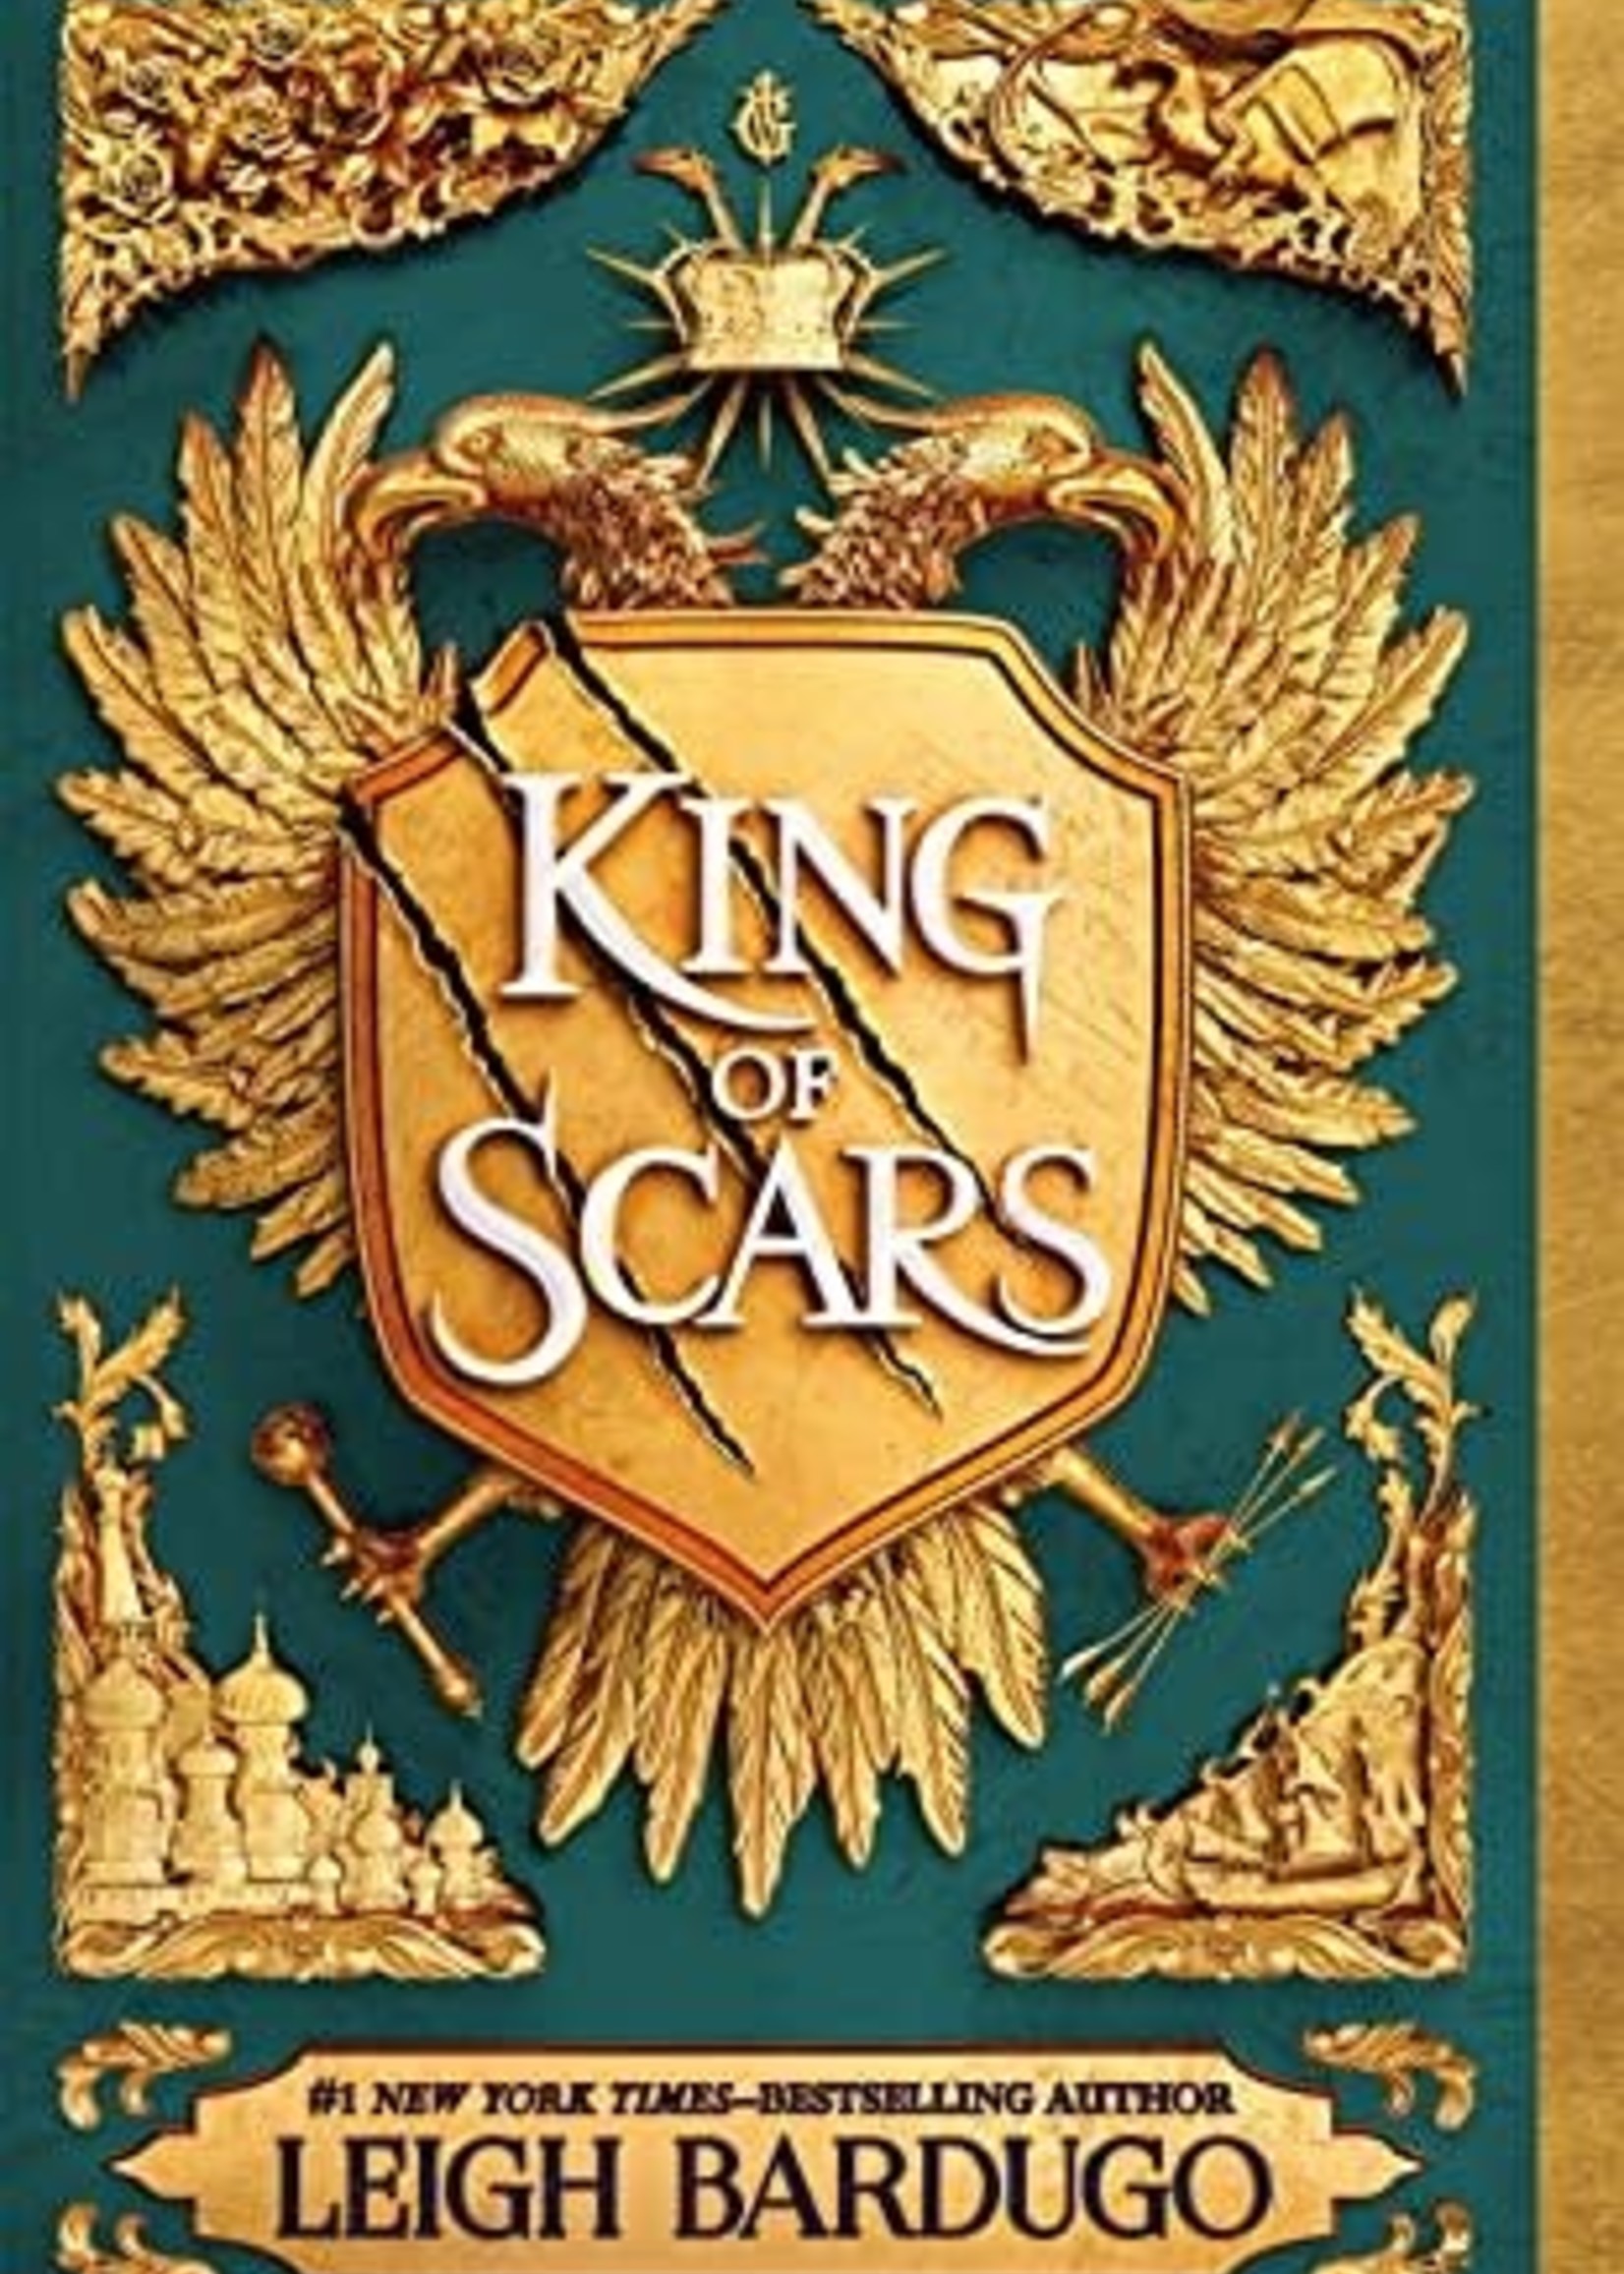 King of Scars (King of Scars #1) by Leigh Bardugo